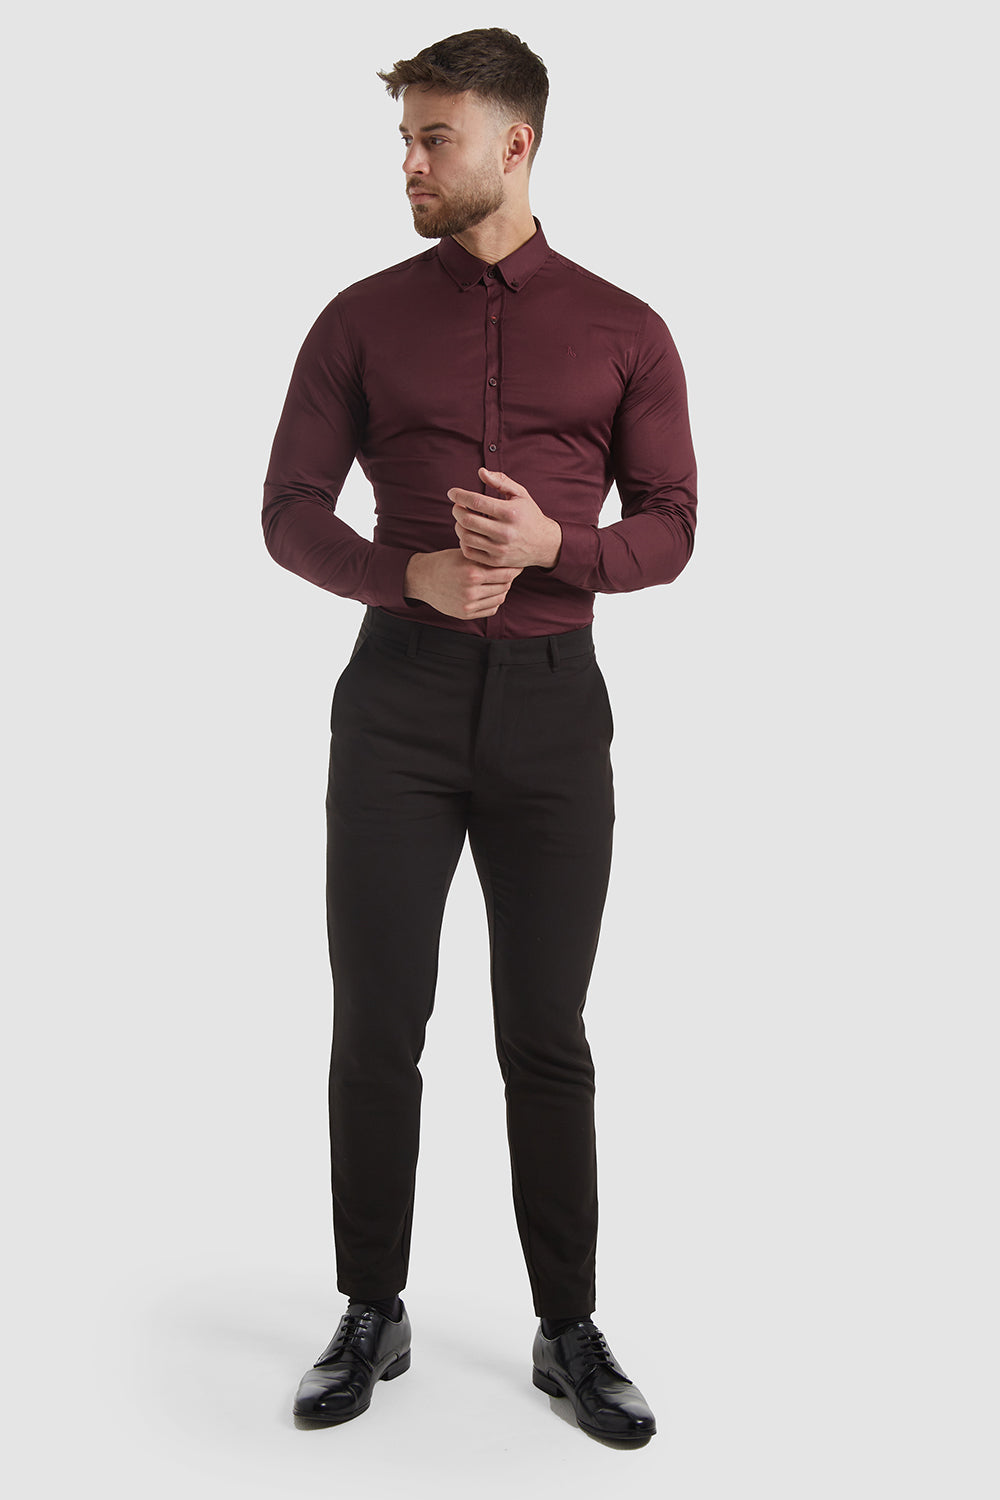 Muscle Fit Essential Trousers 2.0 in Black - TAILORED ATHLETE - ROW